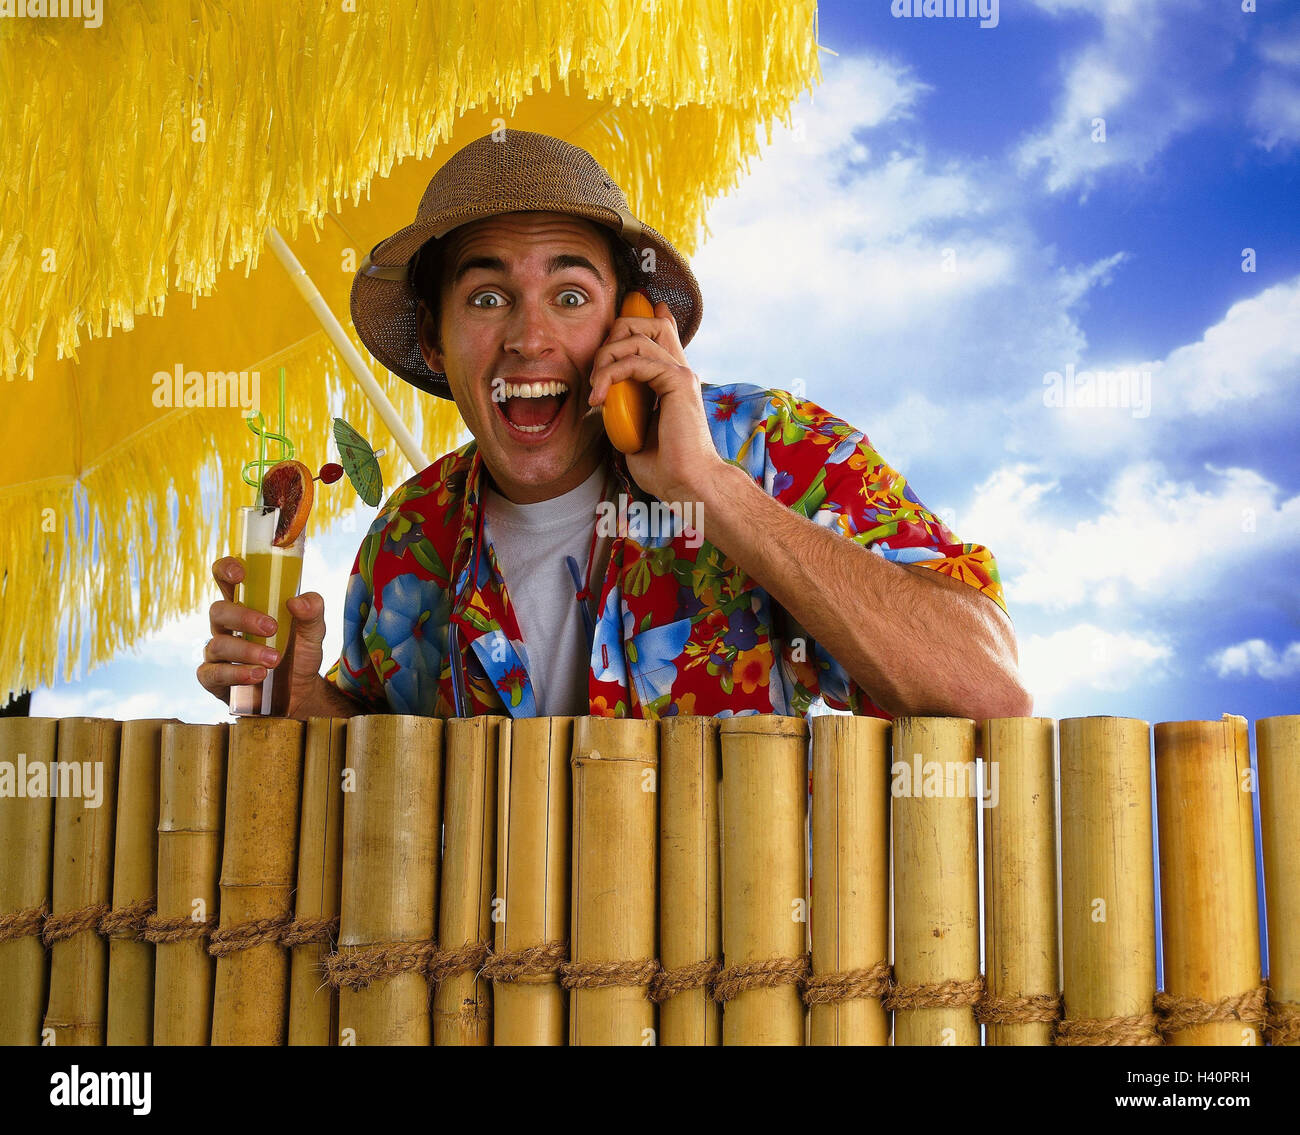 Fence, sunshade, man, straw hat, Hawaii shirt, call up, facial play, joy, cocktail Holiday, vacation, vacationer, tourist, alcohol, phone, mobile phone, communication, telephone call, happy, pleases, enthusiastically, enthusiasm, surprise, Stock Photo